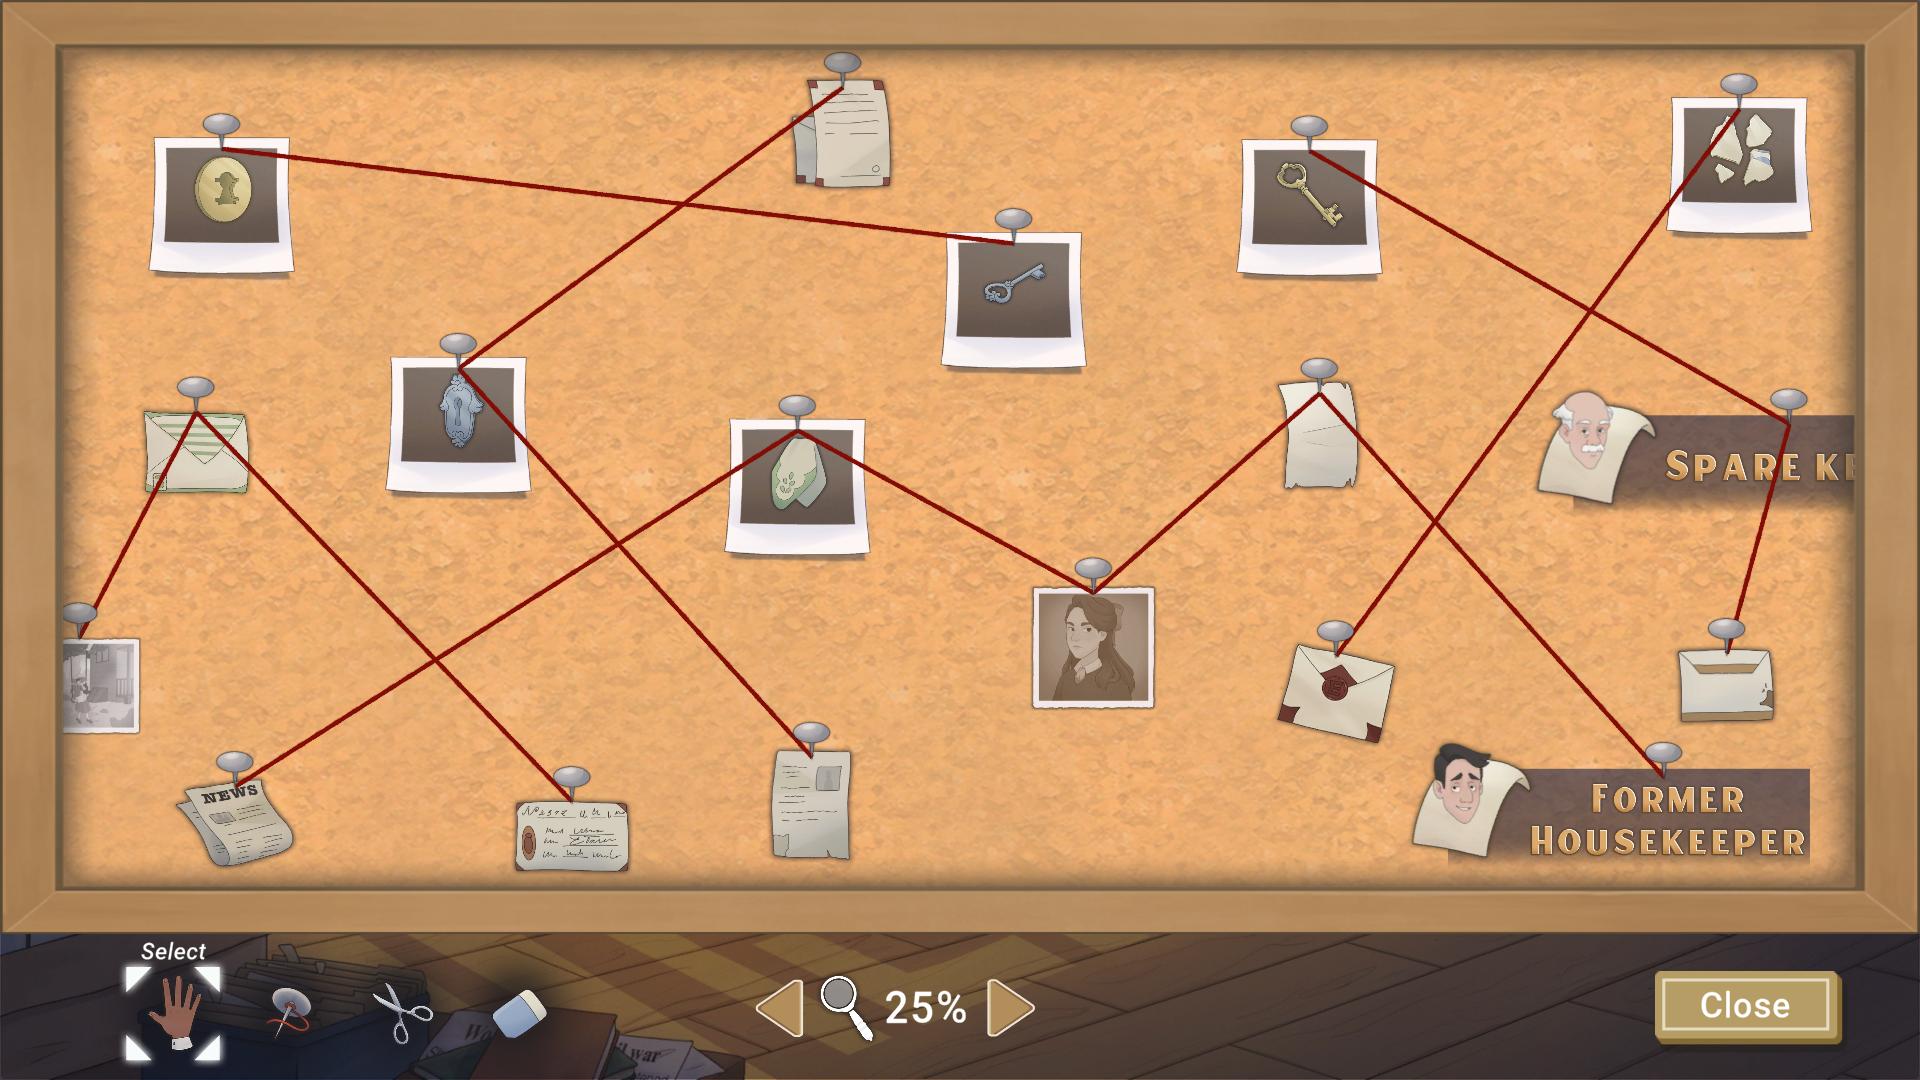 The deductions board with red string connecting items, clues, and notes. 